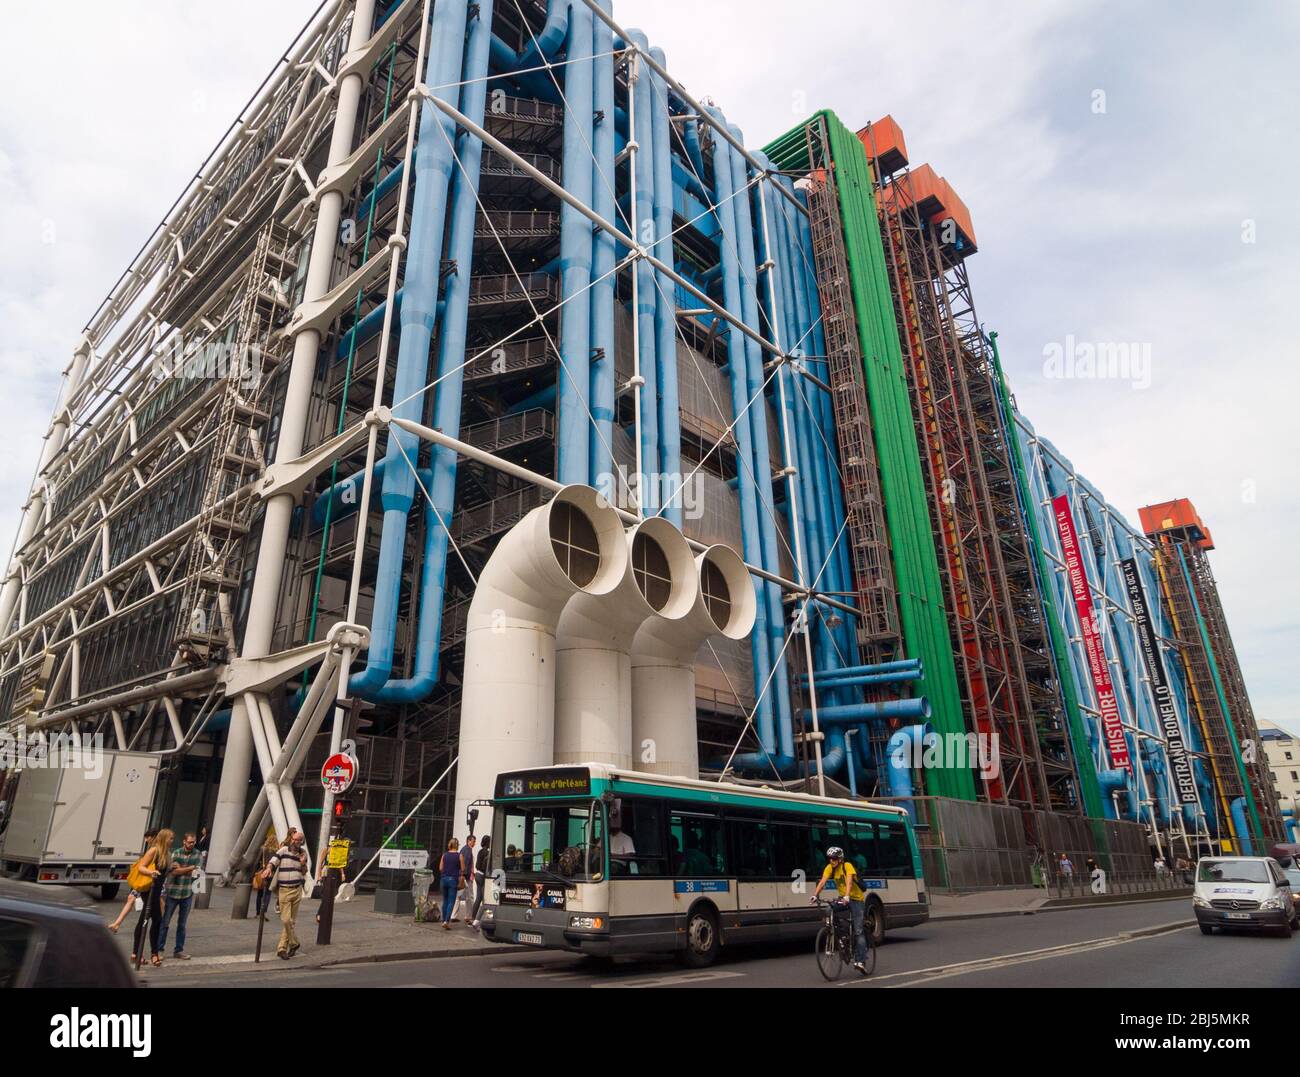 PARIS - SEPT 17, 2014: Facade of the Centre of Georges Pompidou in Paris, France. The Centre of Georges Pompidou is one of the most famous museums of Stock Photo